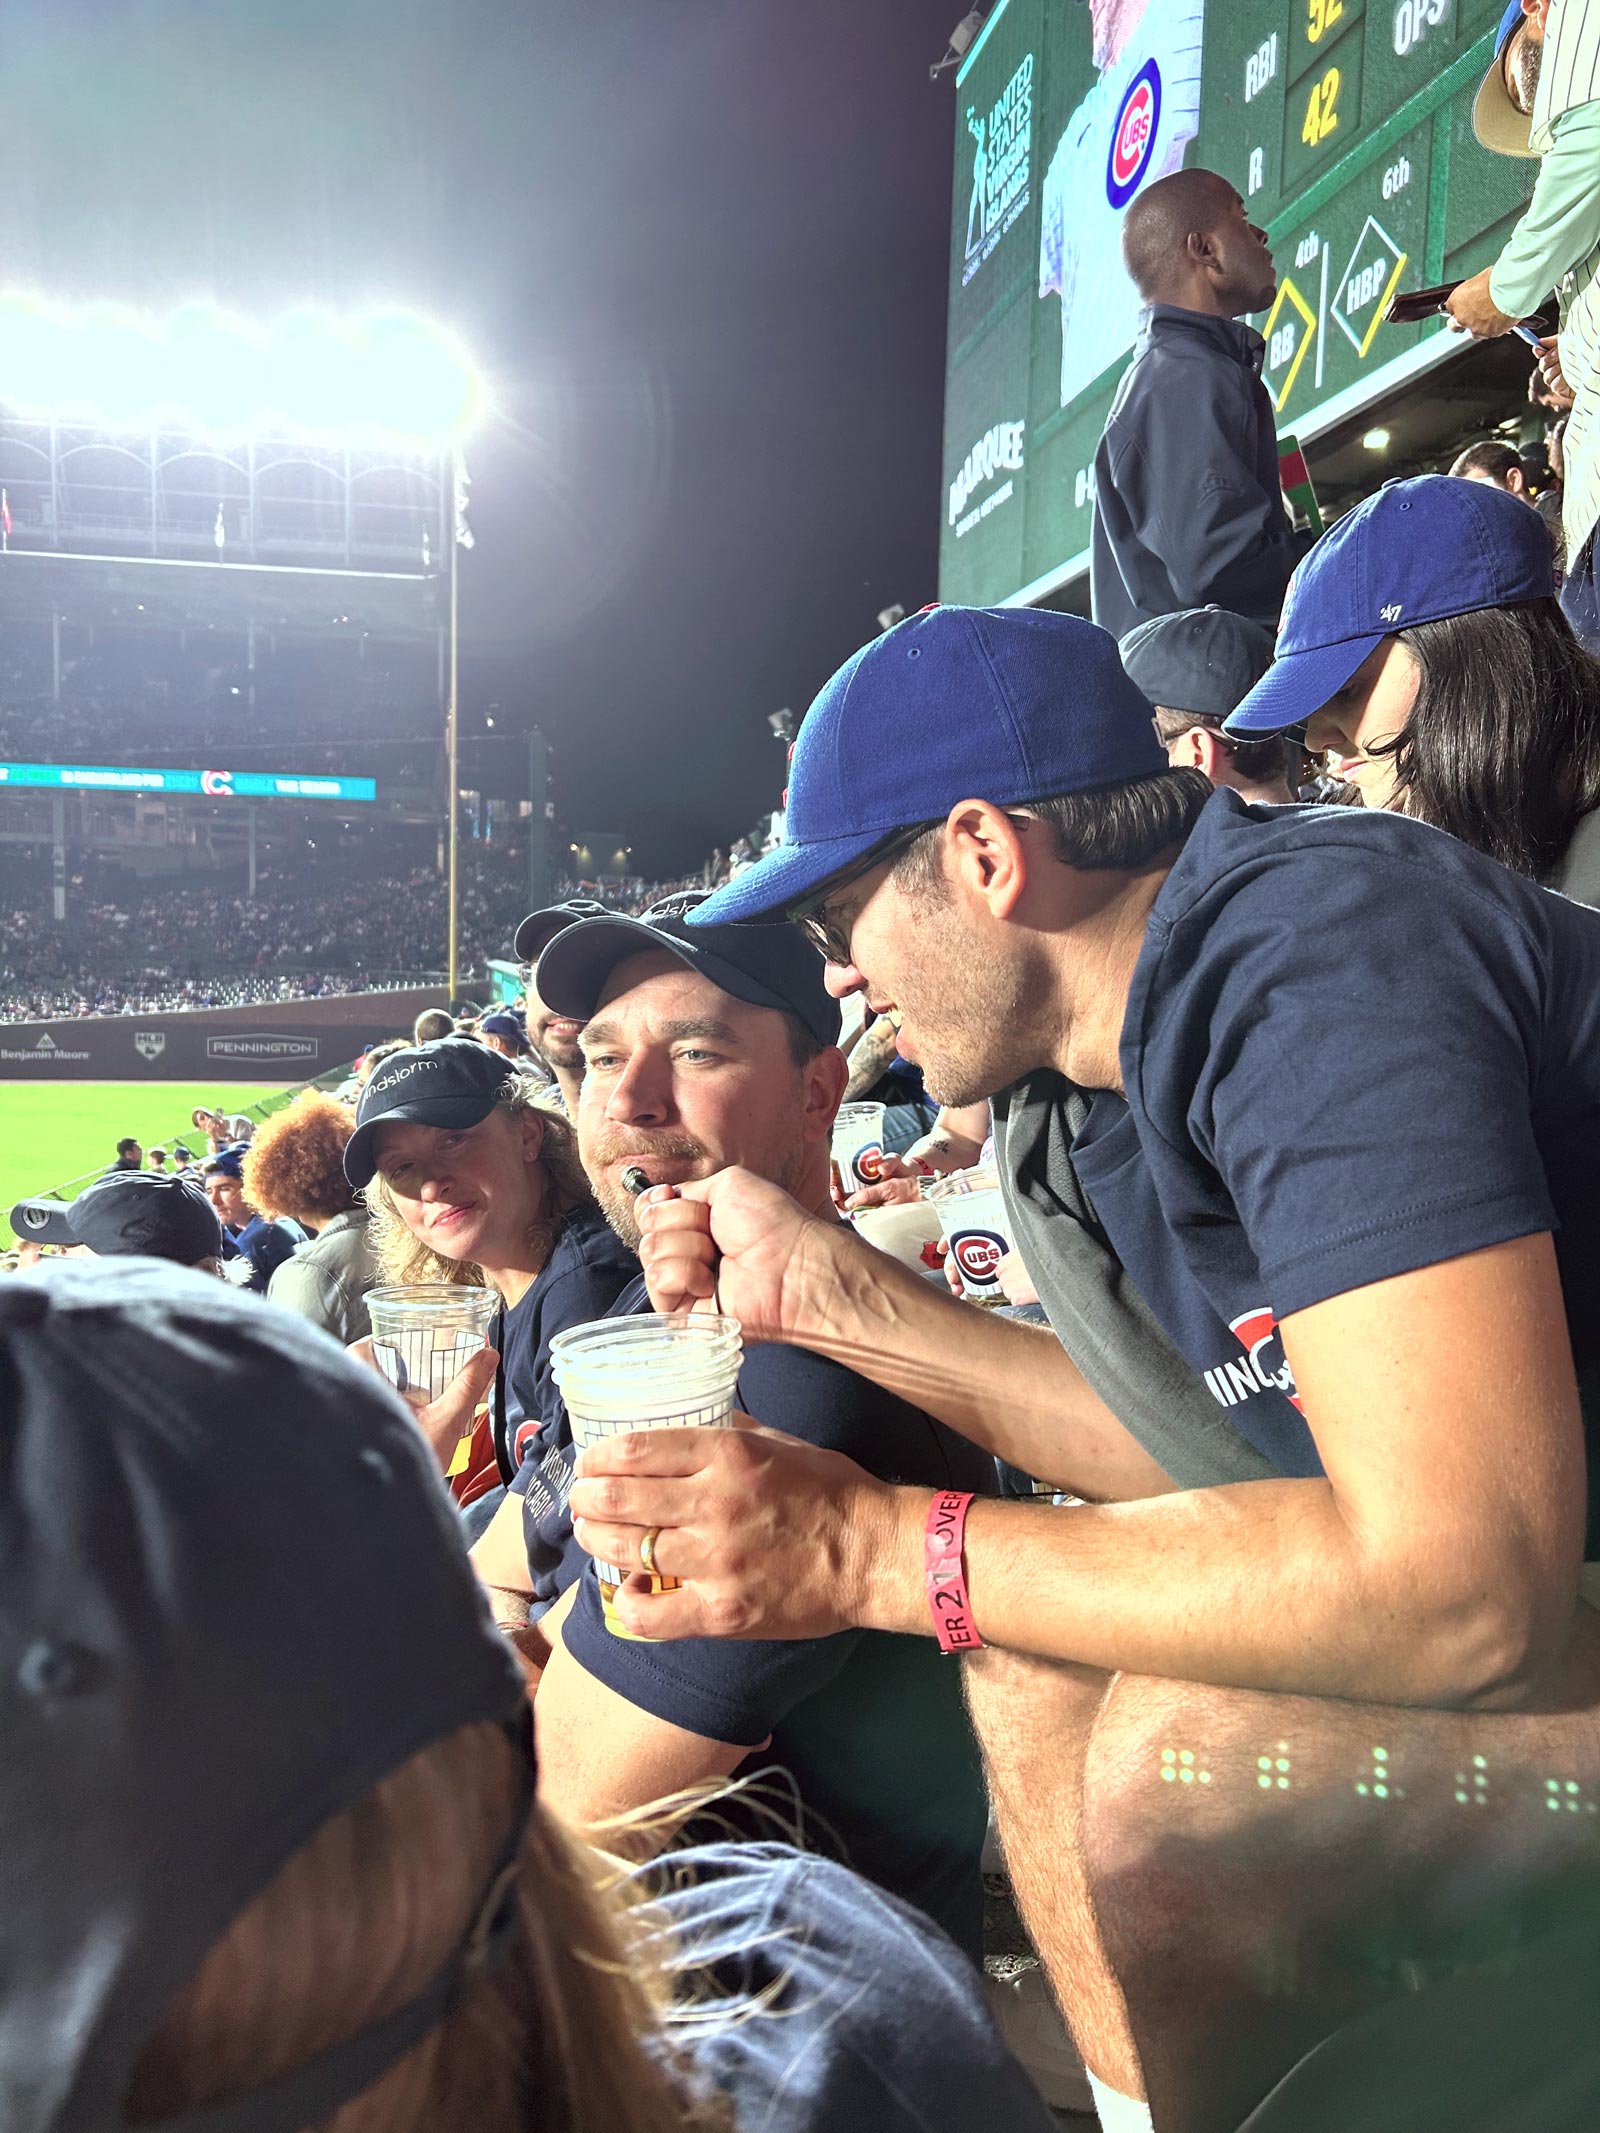 Nathan interviewing Andy with a tiny mic during the Cubs game